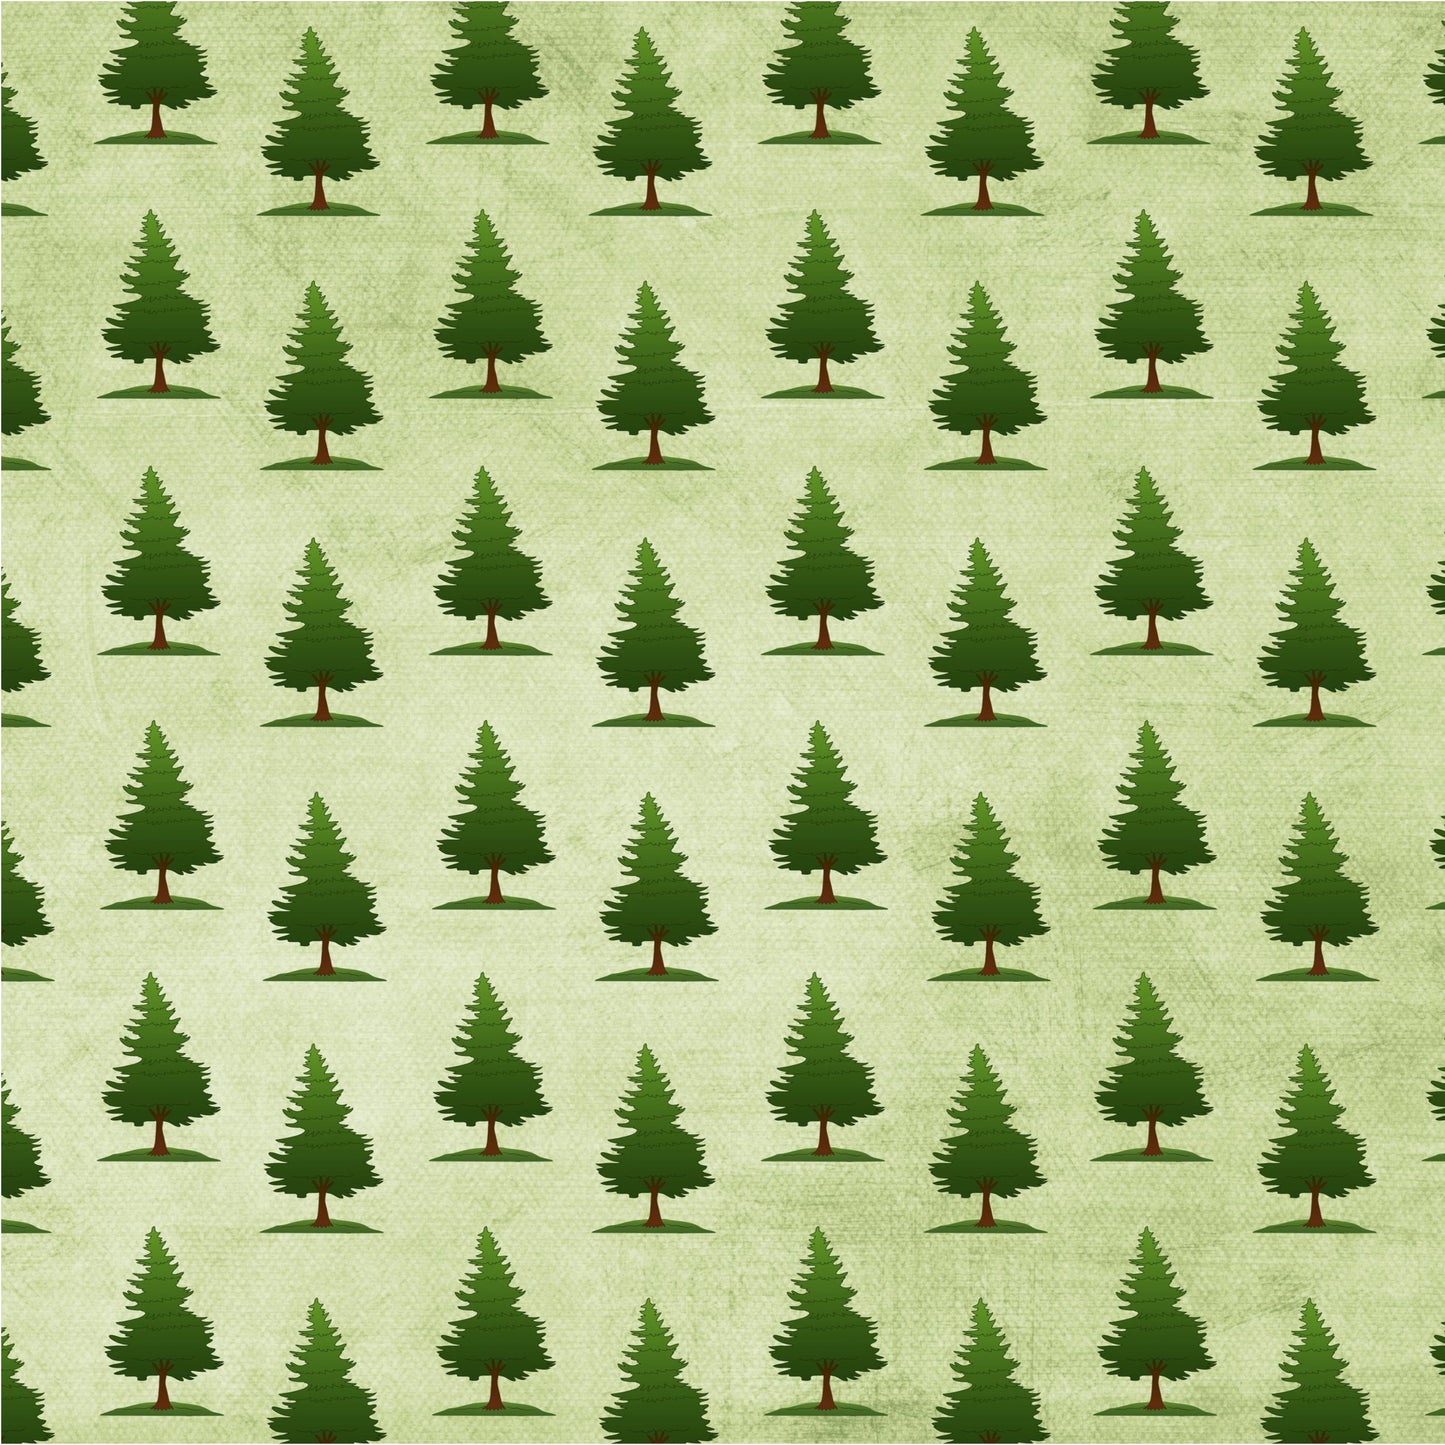 FS164 evergreen trees camping